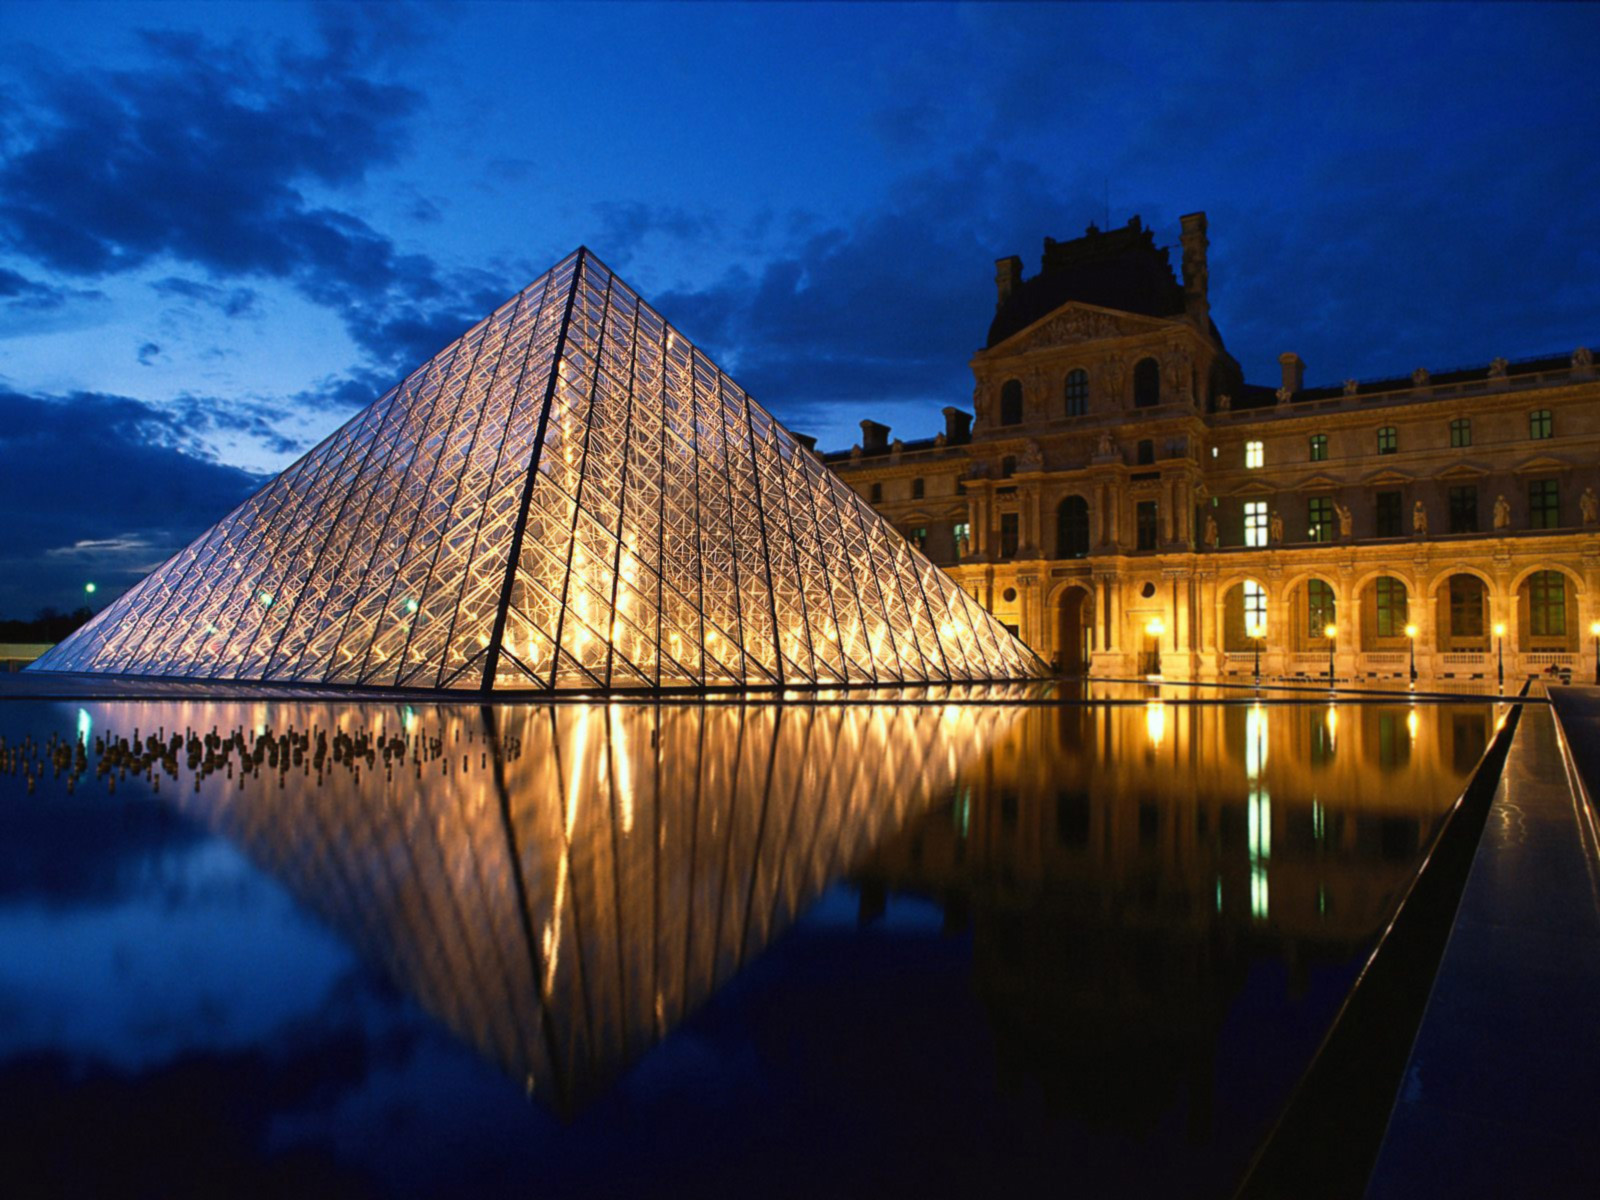 Musée du Louvre is officially opened in Paris, France